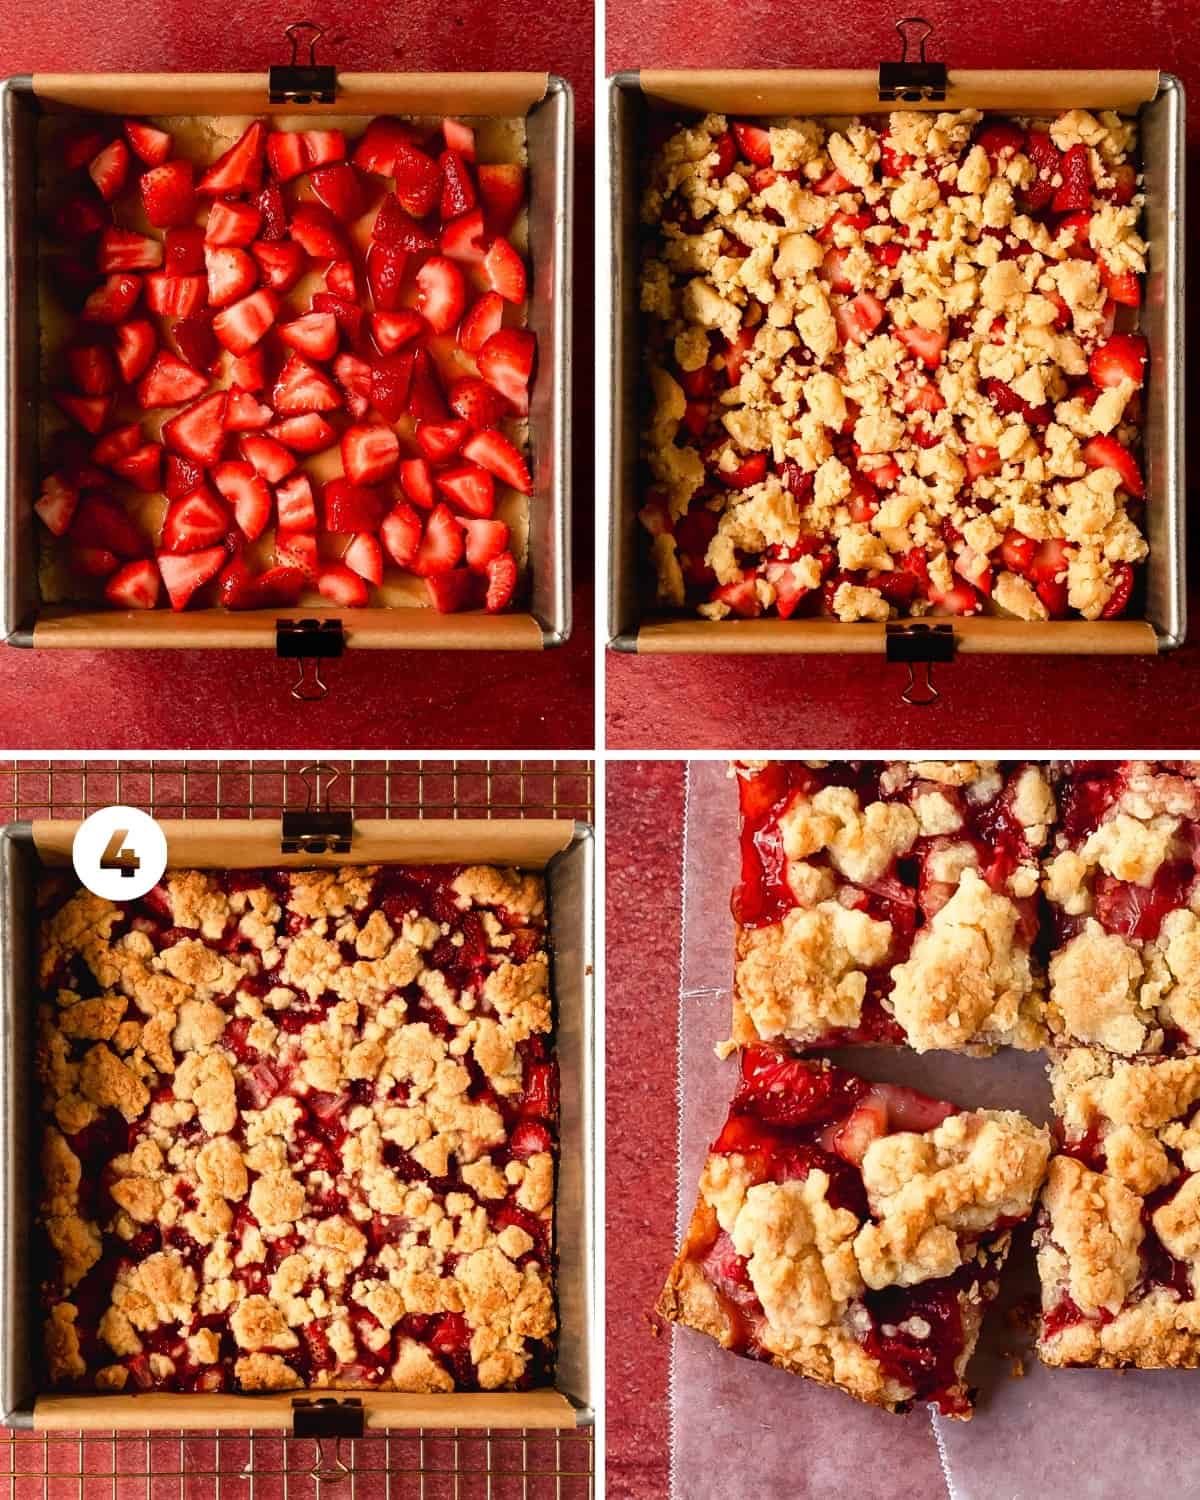 Bake the fresh strawberry bars for 35 - 45 minutes or until the crust is a nice golden brown with edges of the crust pulling slightly away from the sides of the pan. The strawberry filling will thicken and bubble. Cool the crumble bars in the pan for 1 hour. If the bars are too soft to easily transfer from the pan after 1 hour at room temperature, transfer to the fridge to set for another hour. Once the bars are set, top with powdered sugar, lemon drizzle or enjoy as is. 